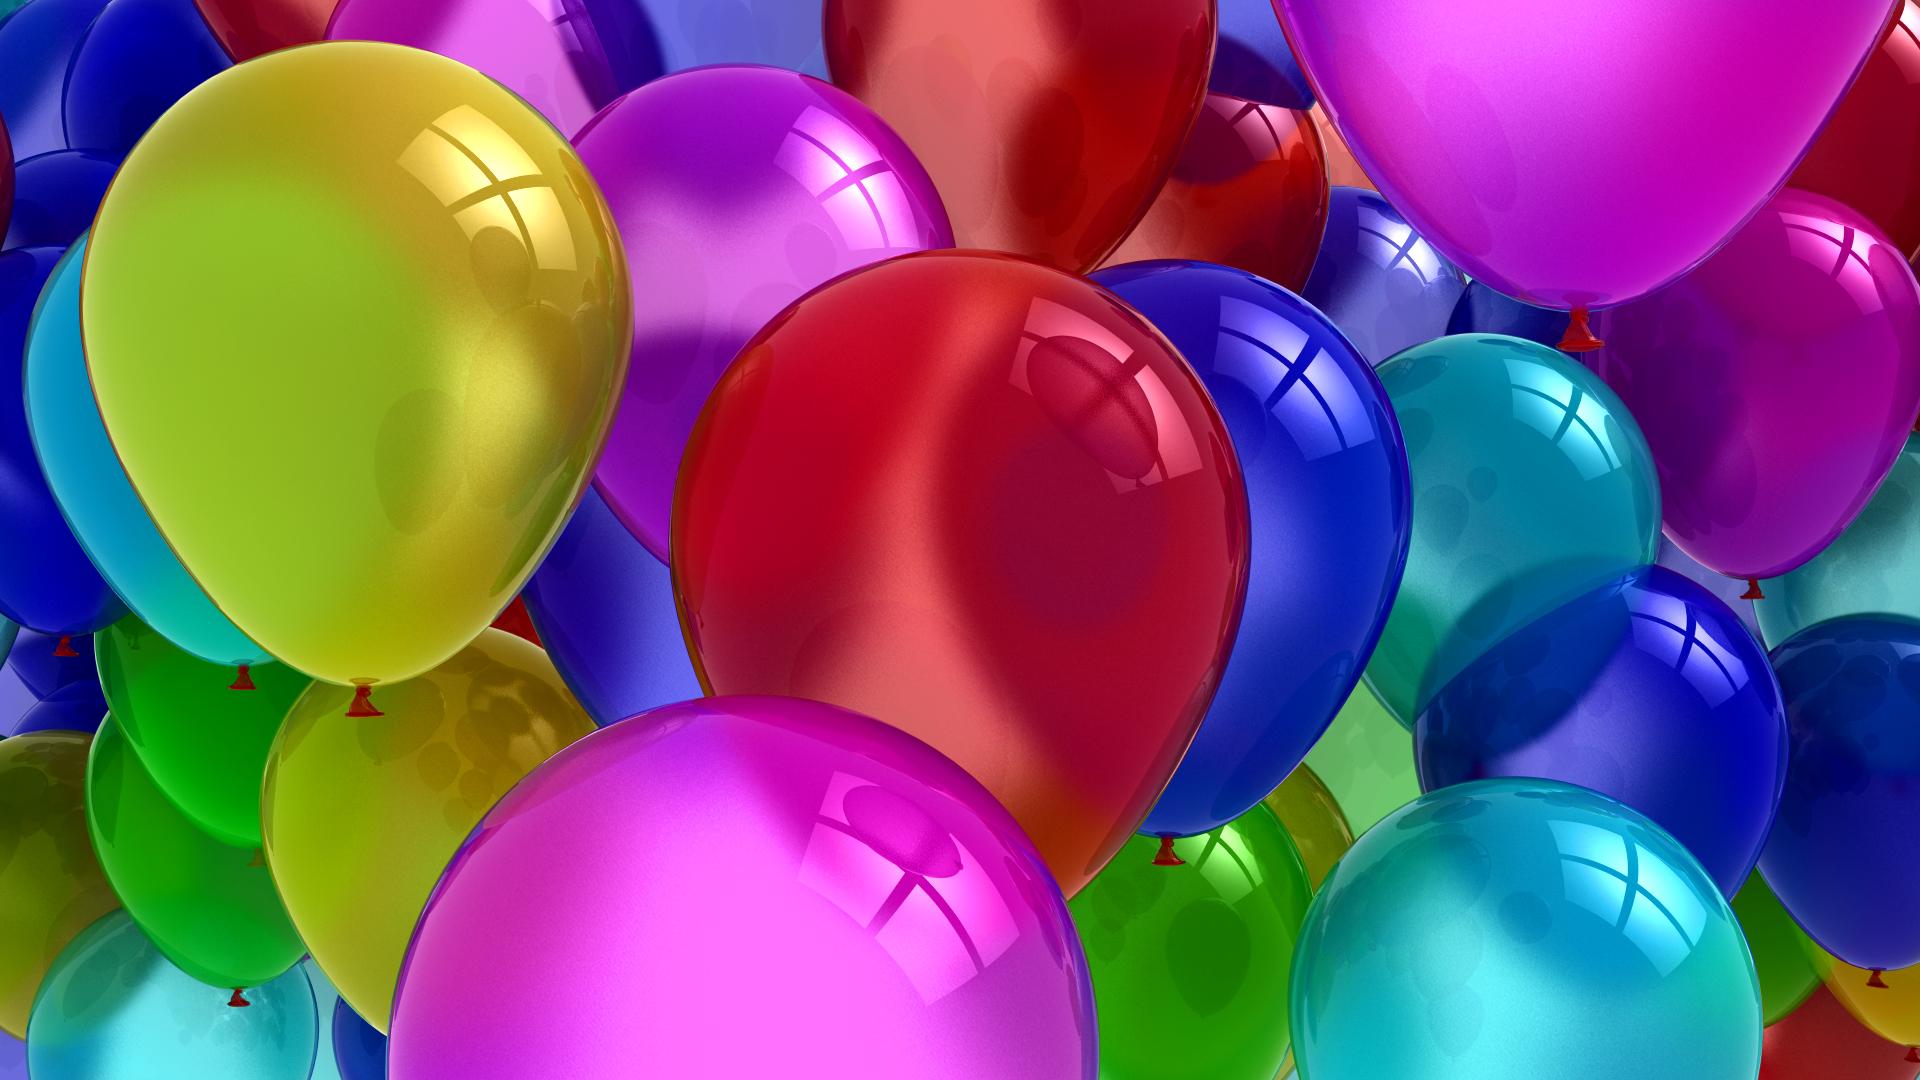 Balloon Background Images  Free iPhone  Zoom HD Wallpapers  Vectors   rawpixel